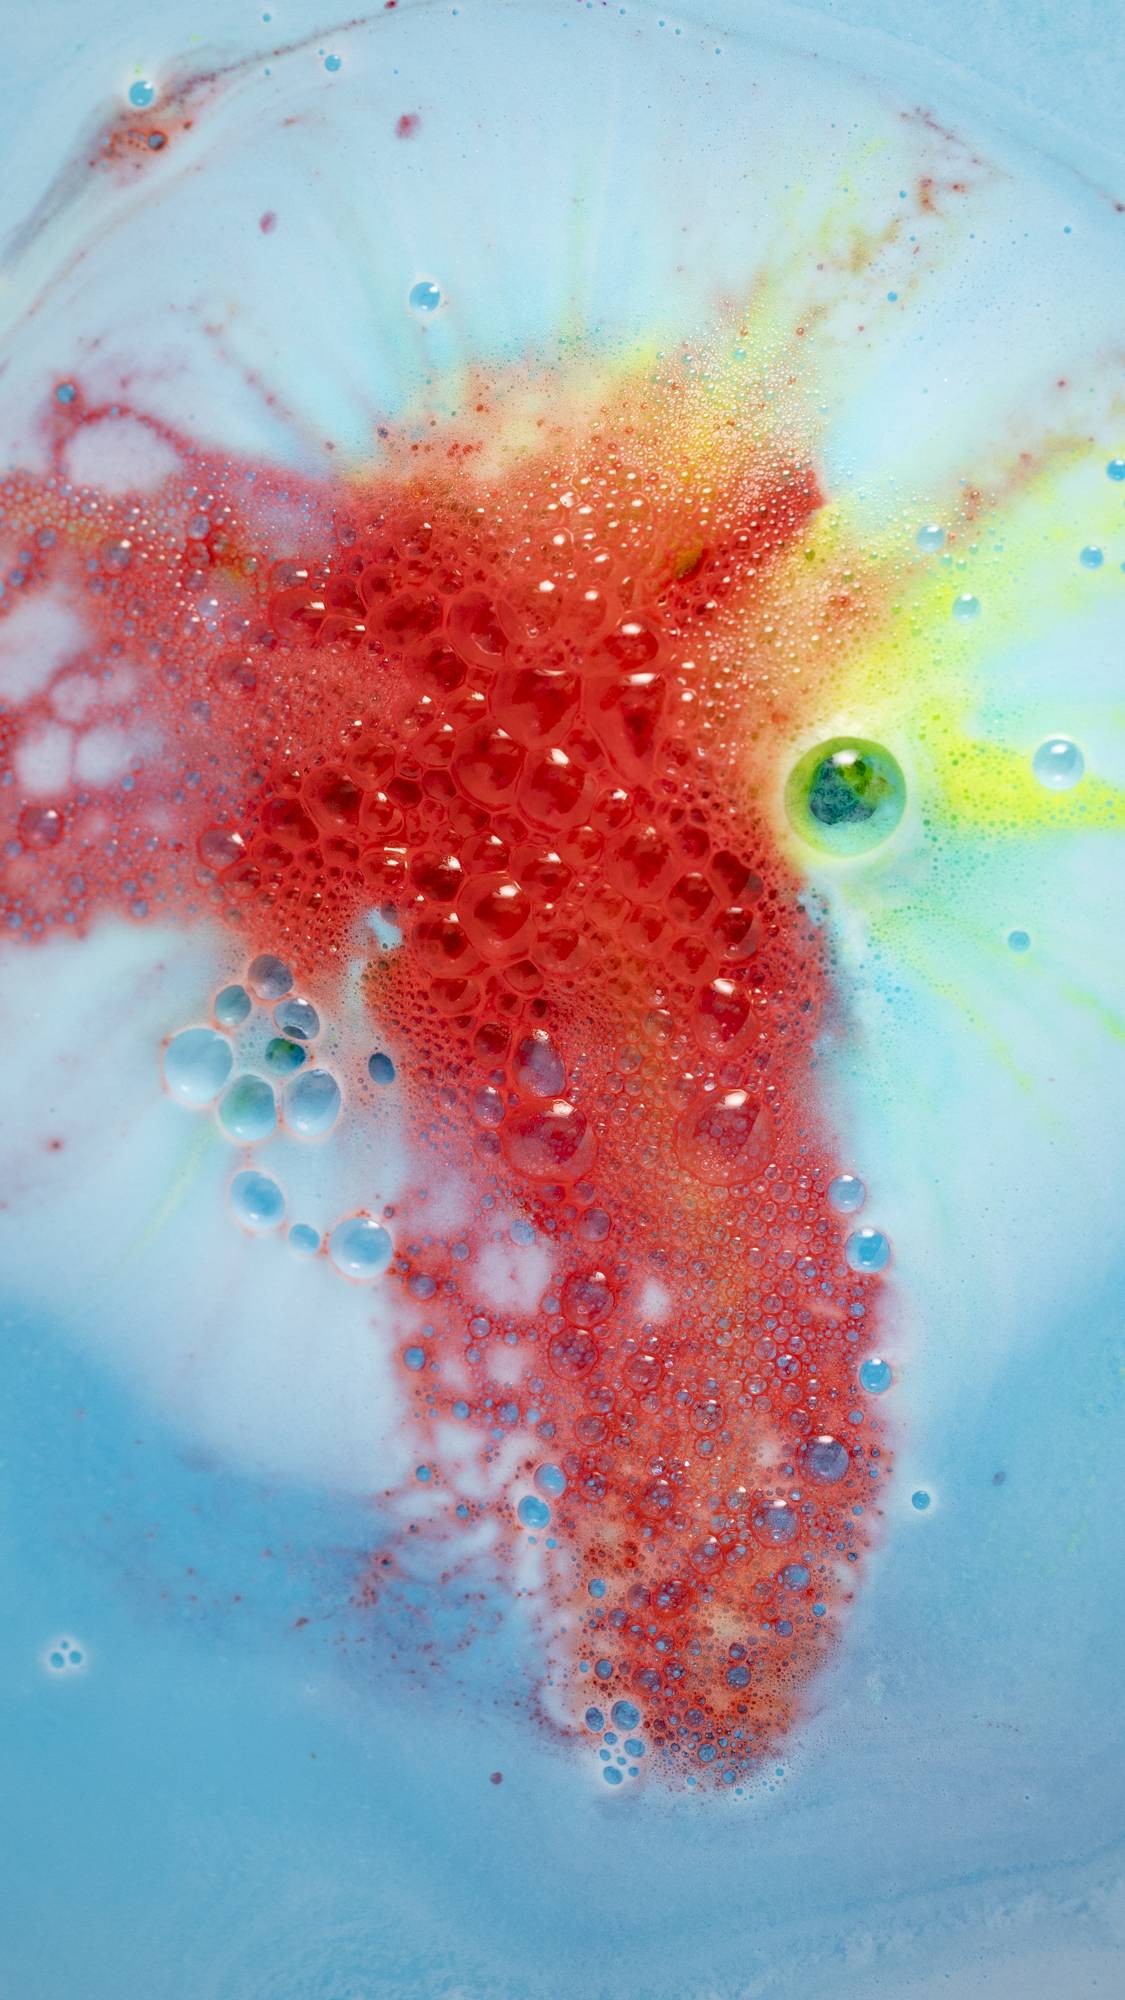 The Super Dad bath bomb is giving off bright fiery, red foamy swirls among the sea of blue.